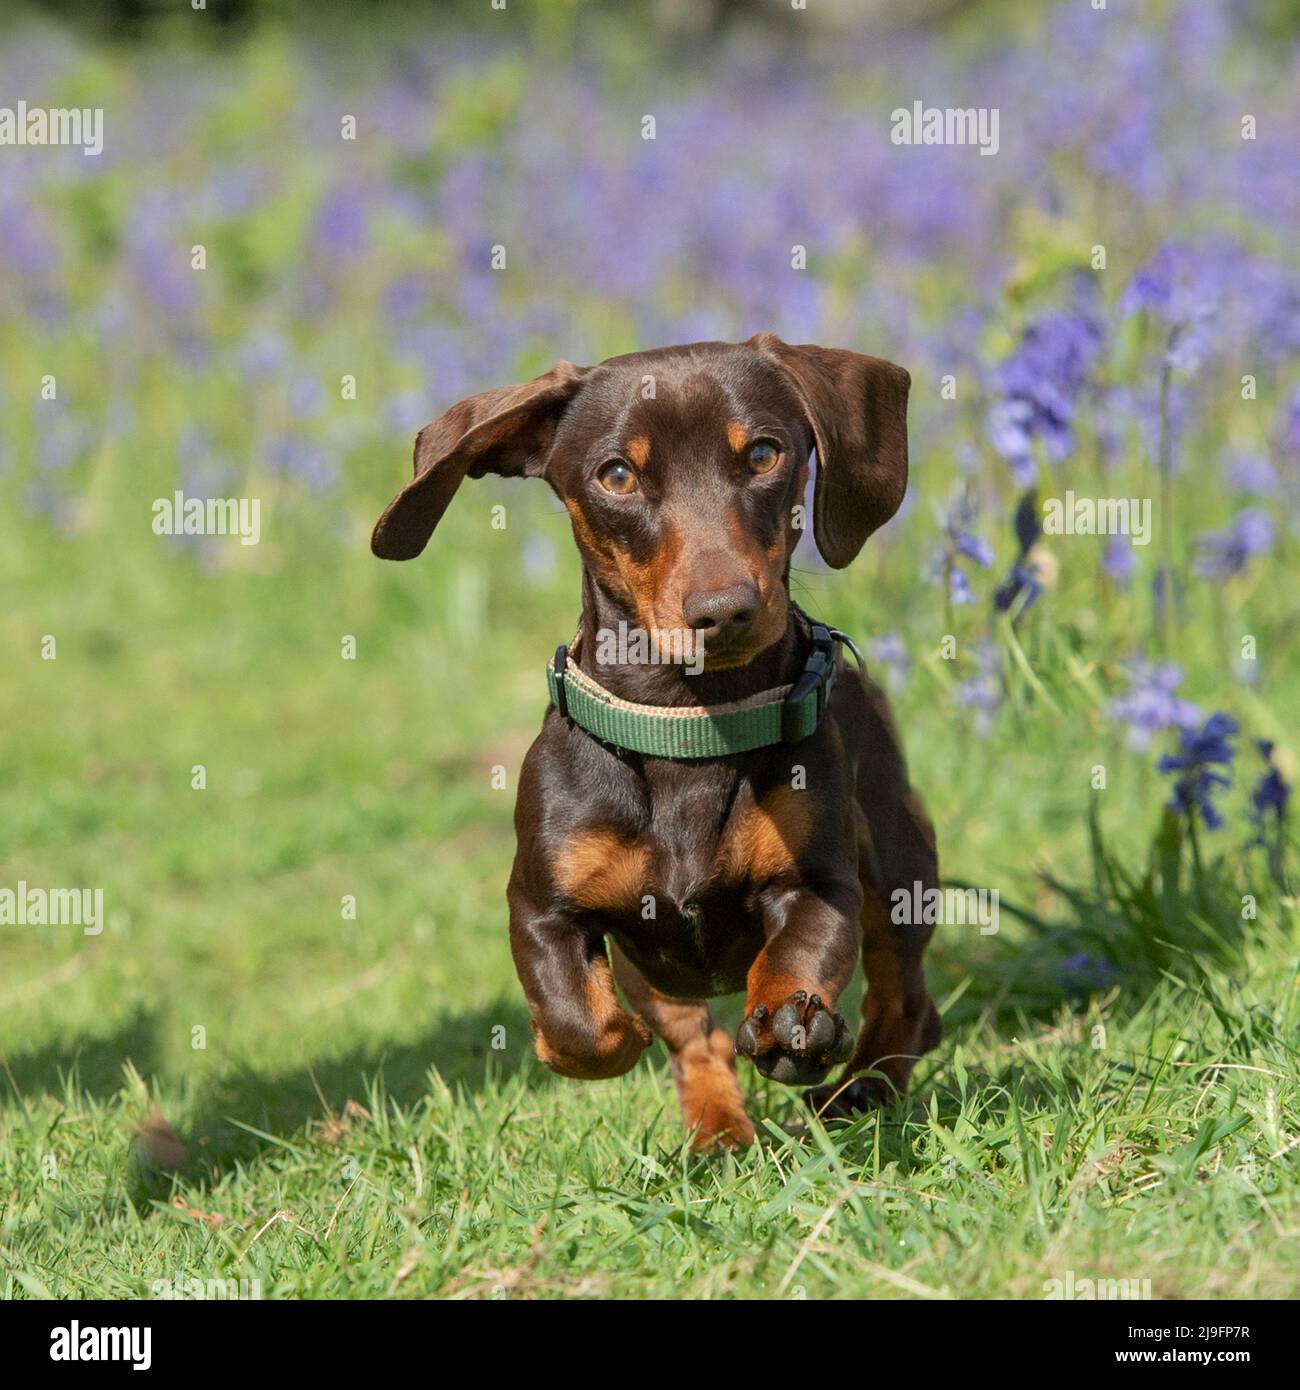 Miniature smooth haired Dachshund running towards the camera Stock Photo